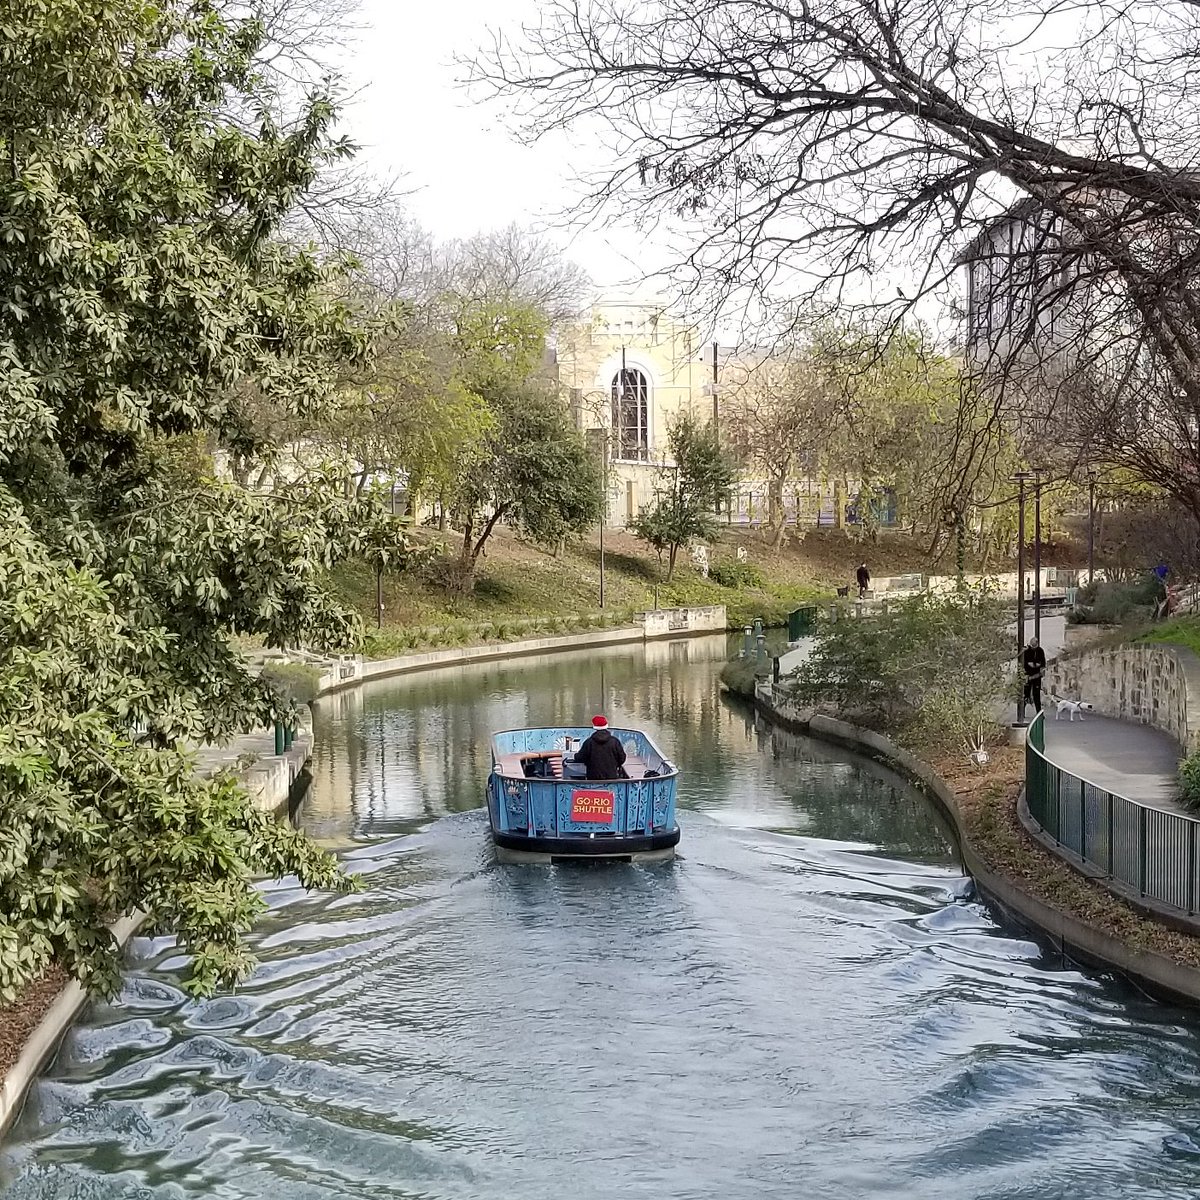 Wyndham Garden River Walk On Twitter It Is A Perfect Day To Ride